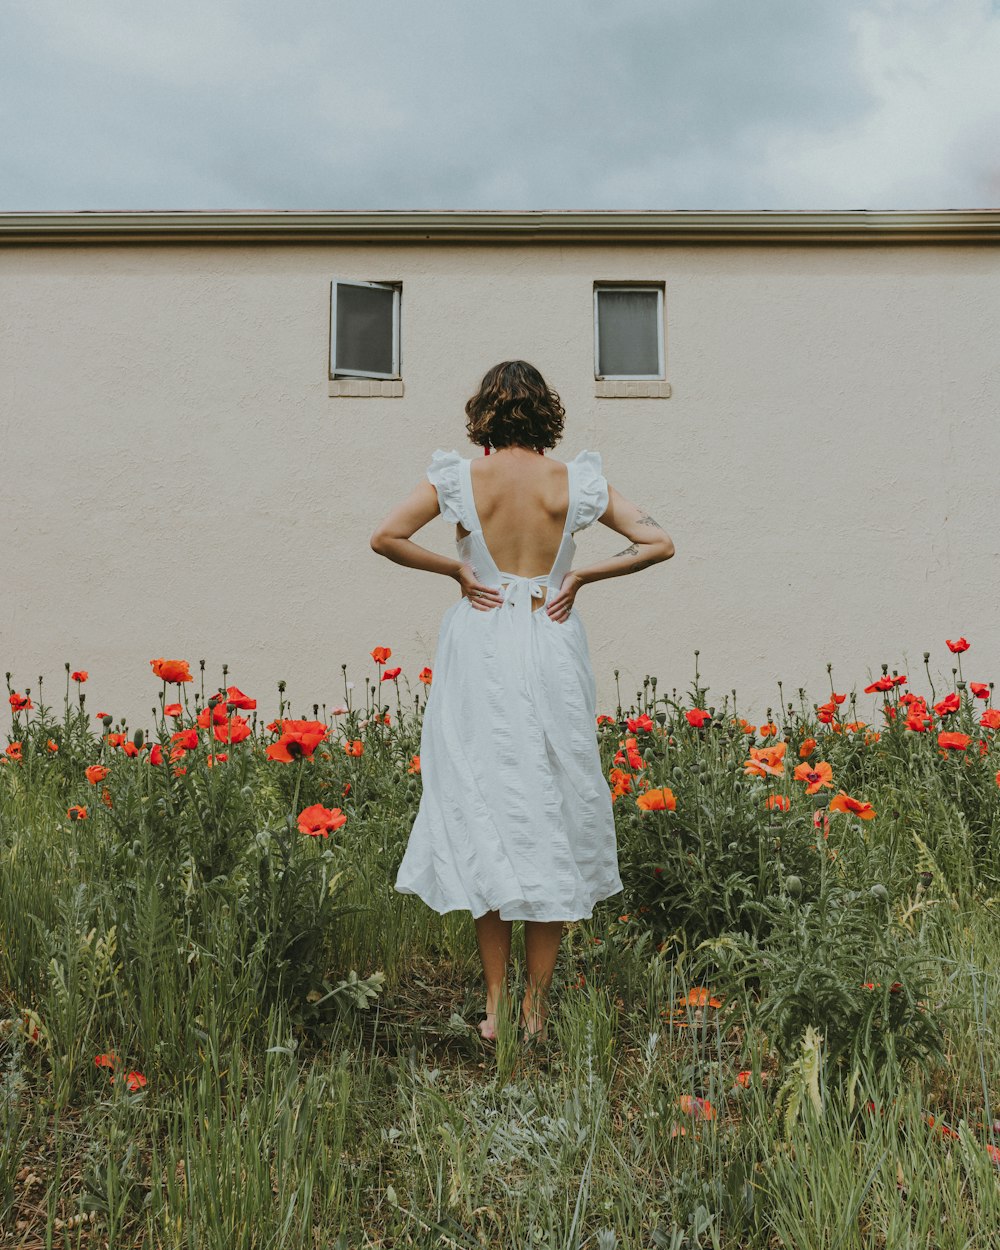 woman in white dress standing on red flower field during daytime